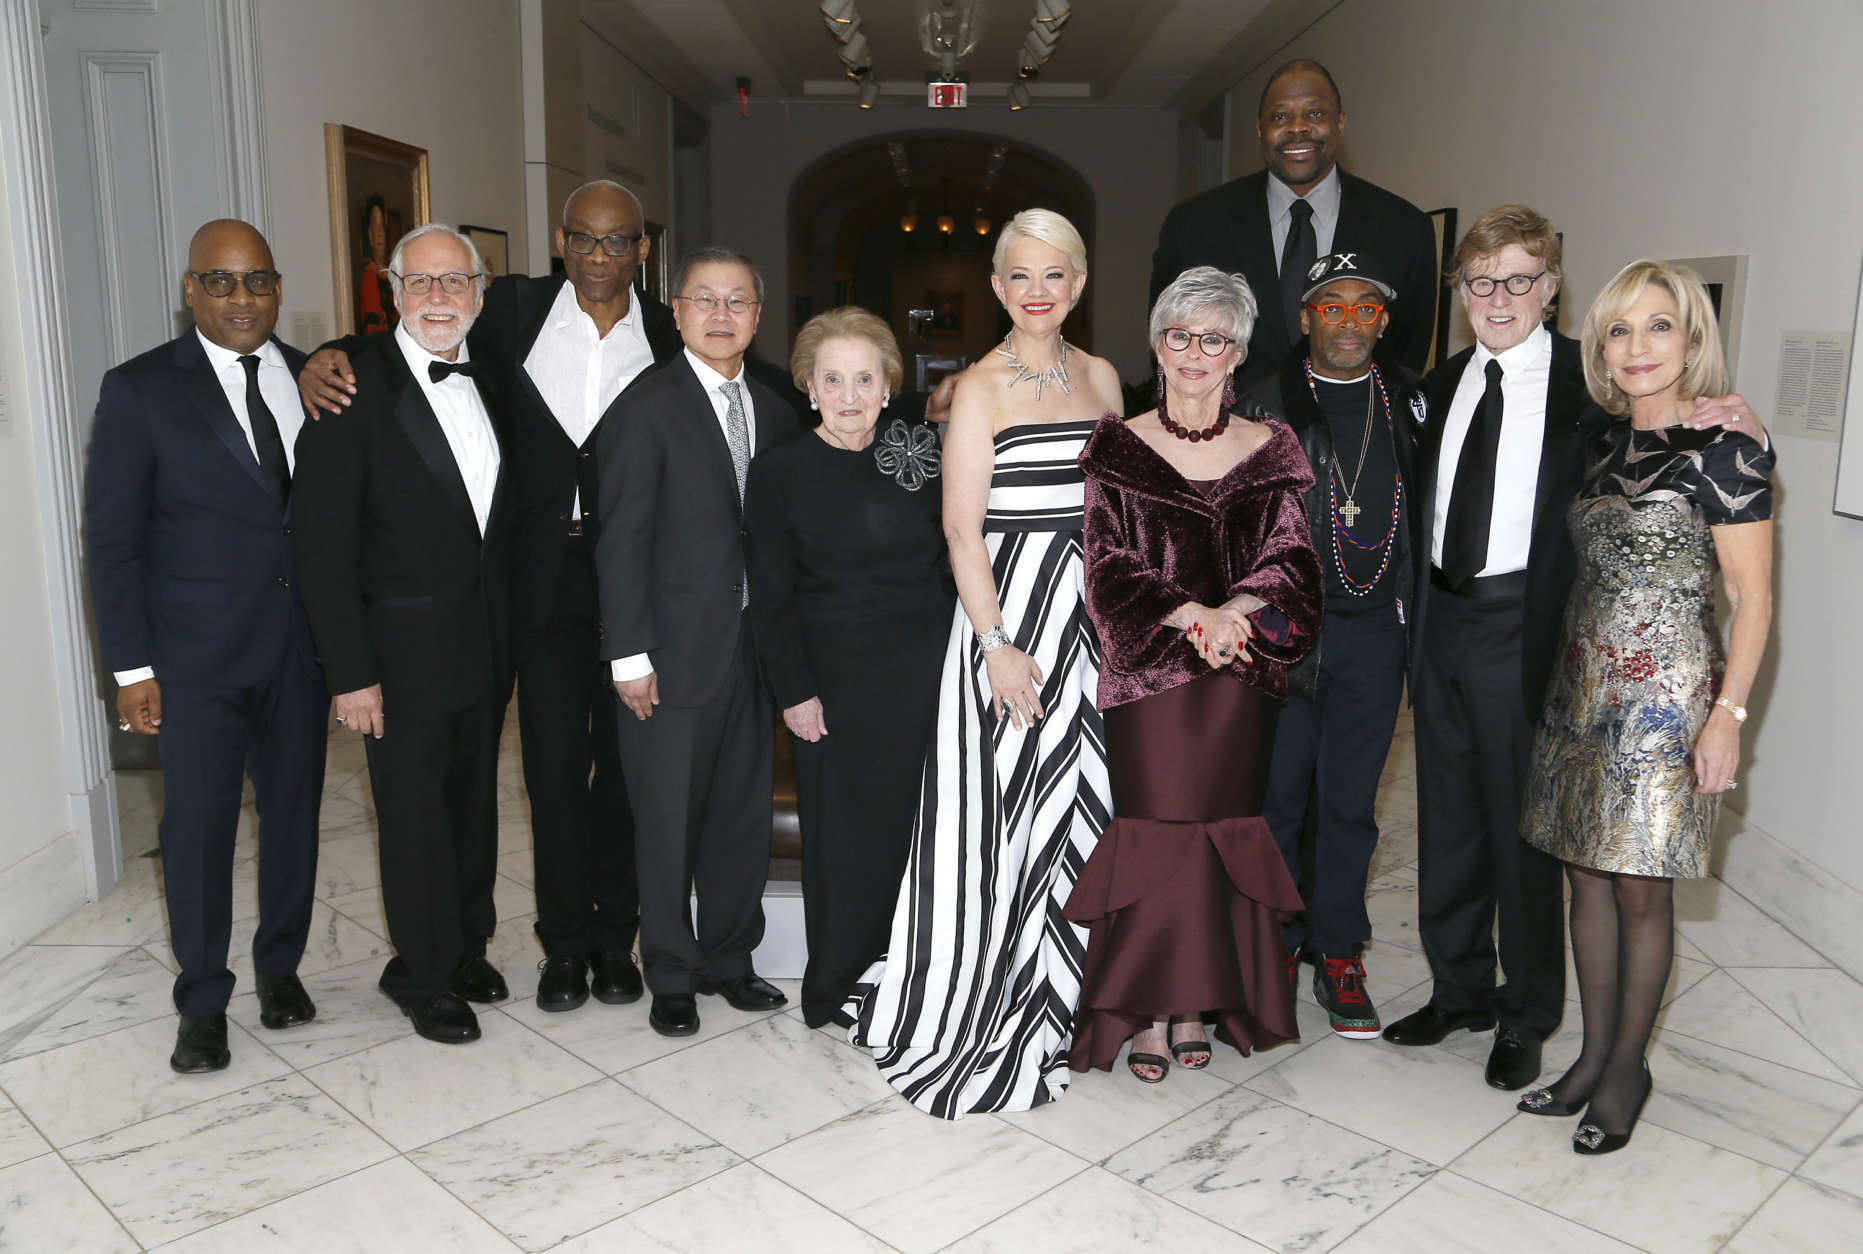 IMAGE DISTRIBUTED FOR NATIONAL PORTRAIT GALLERY - Left to right, Glenn Ligon, Gerald H. Friedland, M.D., Bill T. Jones, David D. Ho, M.D., Dr. Madeleine K. Albright, Kim Sajet, Rita Moreno, Patrick Ewing, Spike Lee, Robert Redford, and Andrea Mitchell attend The American Portrait Gala 2017 at Smithsonian's National Portrait Gallery on Sunday, Nov. 19, 2017 in Washington, D.C. (Paul Morigi/AP Images for National Portrait Gallery)